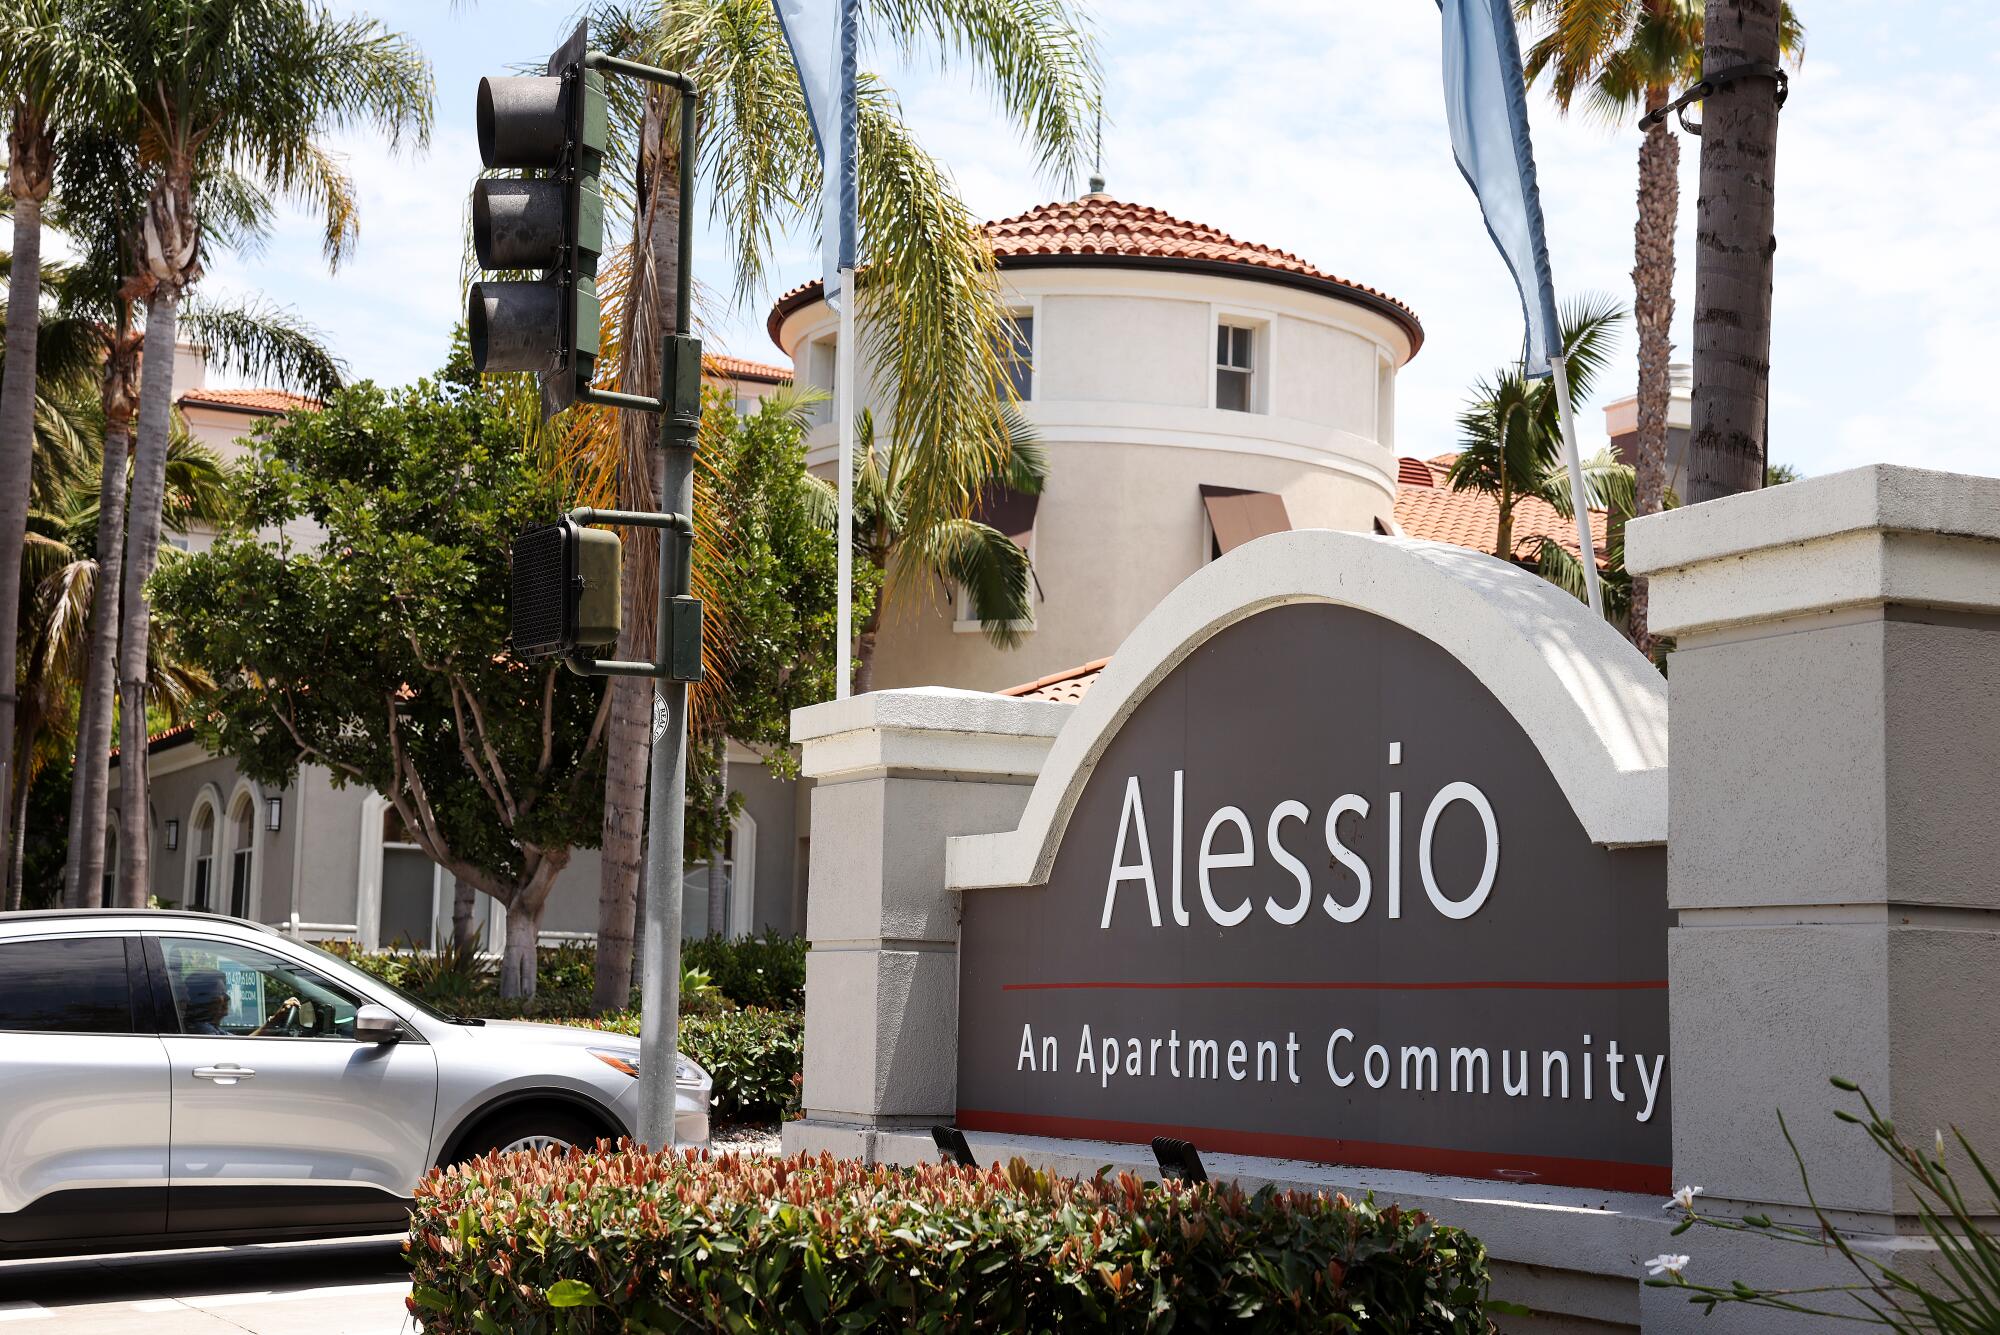 A car passes a sign for the Alessio apartments.